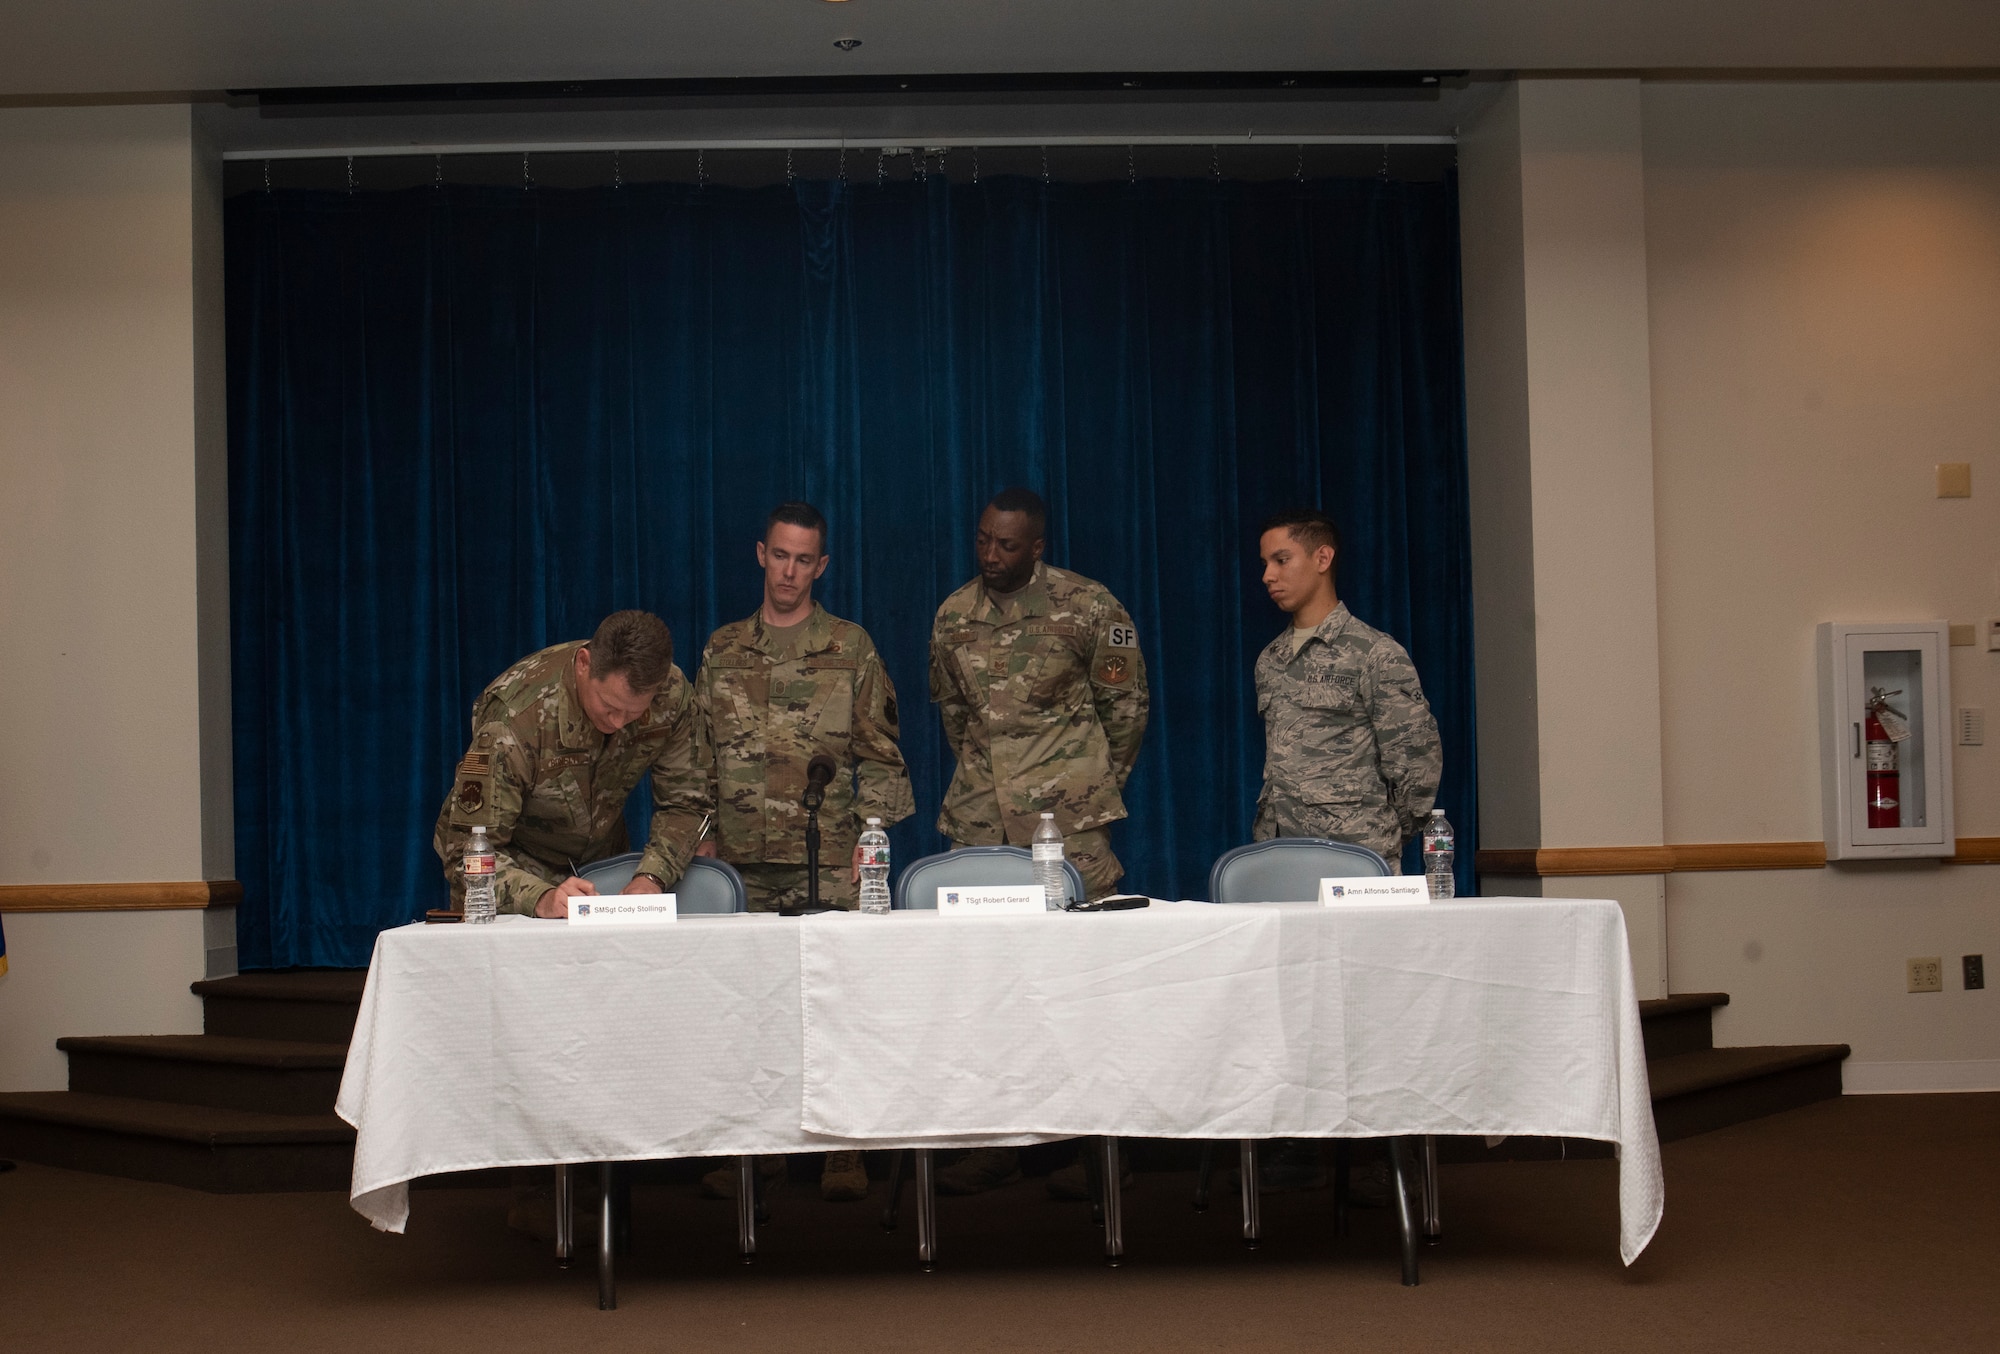 Colonel Peter Bonetti, 90th Missile Wing commander, signs a proclamation, recognizing Suicide Prevention Month and asking the Airmen of F.E. Warren to be there for each other while taking an active role in suicide prevention Sept. 10, 2019, at F.E. Warren Air Force Base, Wyo. The proclamation was signed during a story telling event, allowing a panel of Airmen to share their personal stories of resiliency and strength.